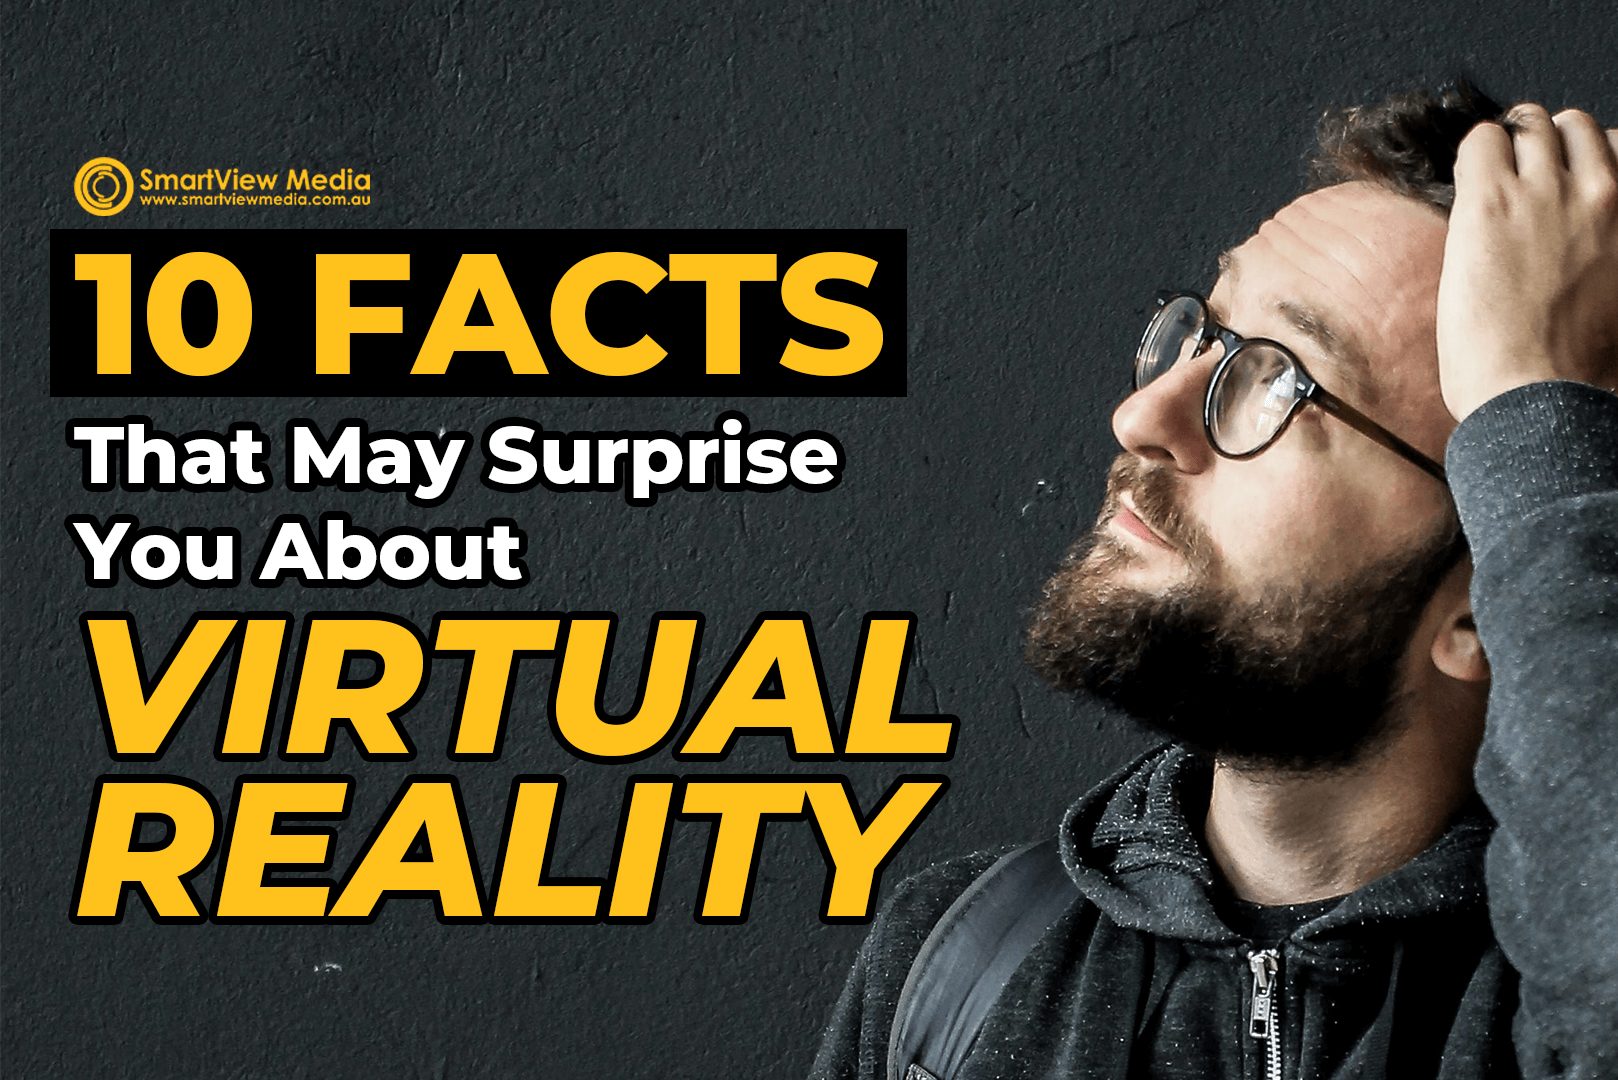 10 Facts That May Surprise You About Virtual Reality